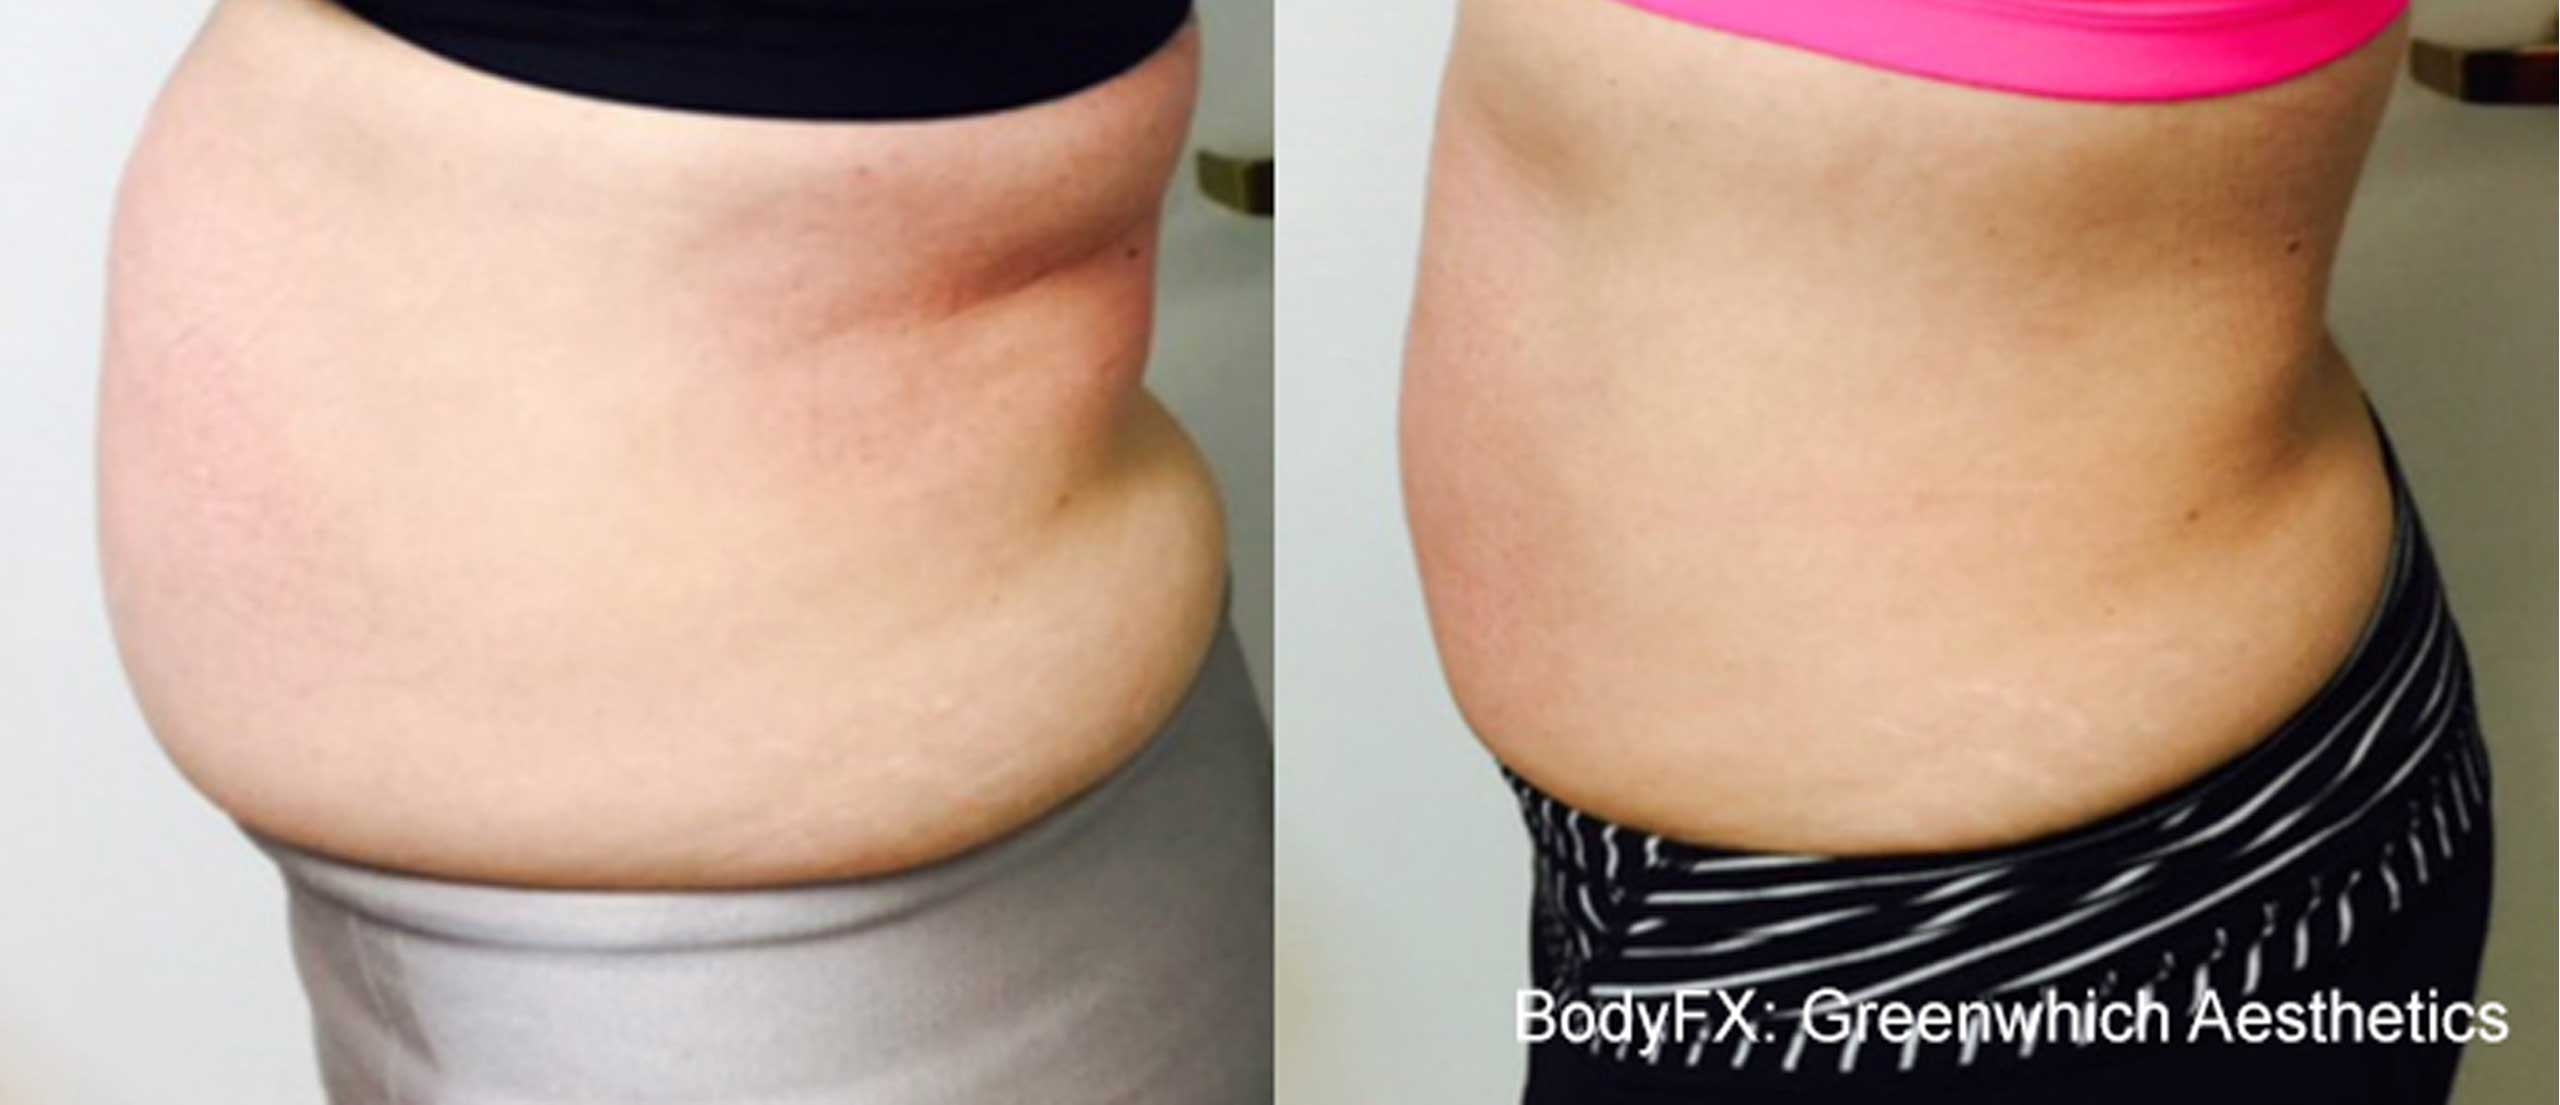 postpartum belly fat reducer in calgary